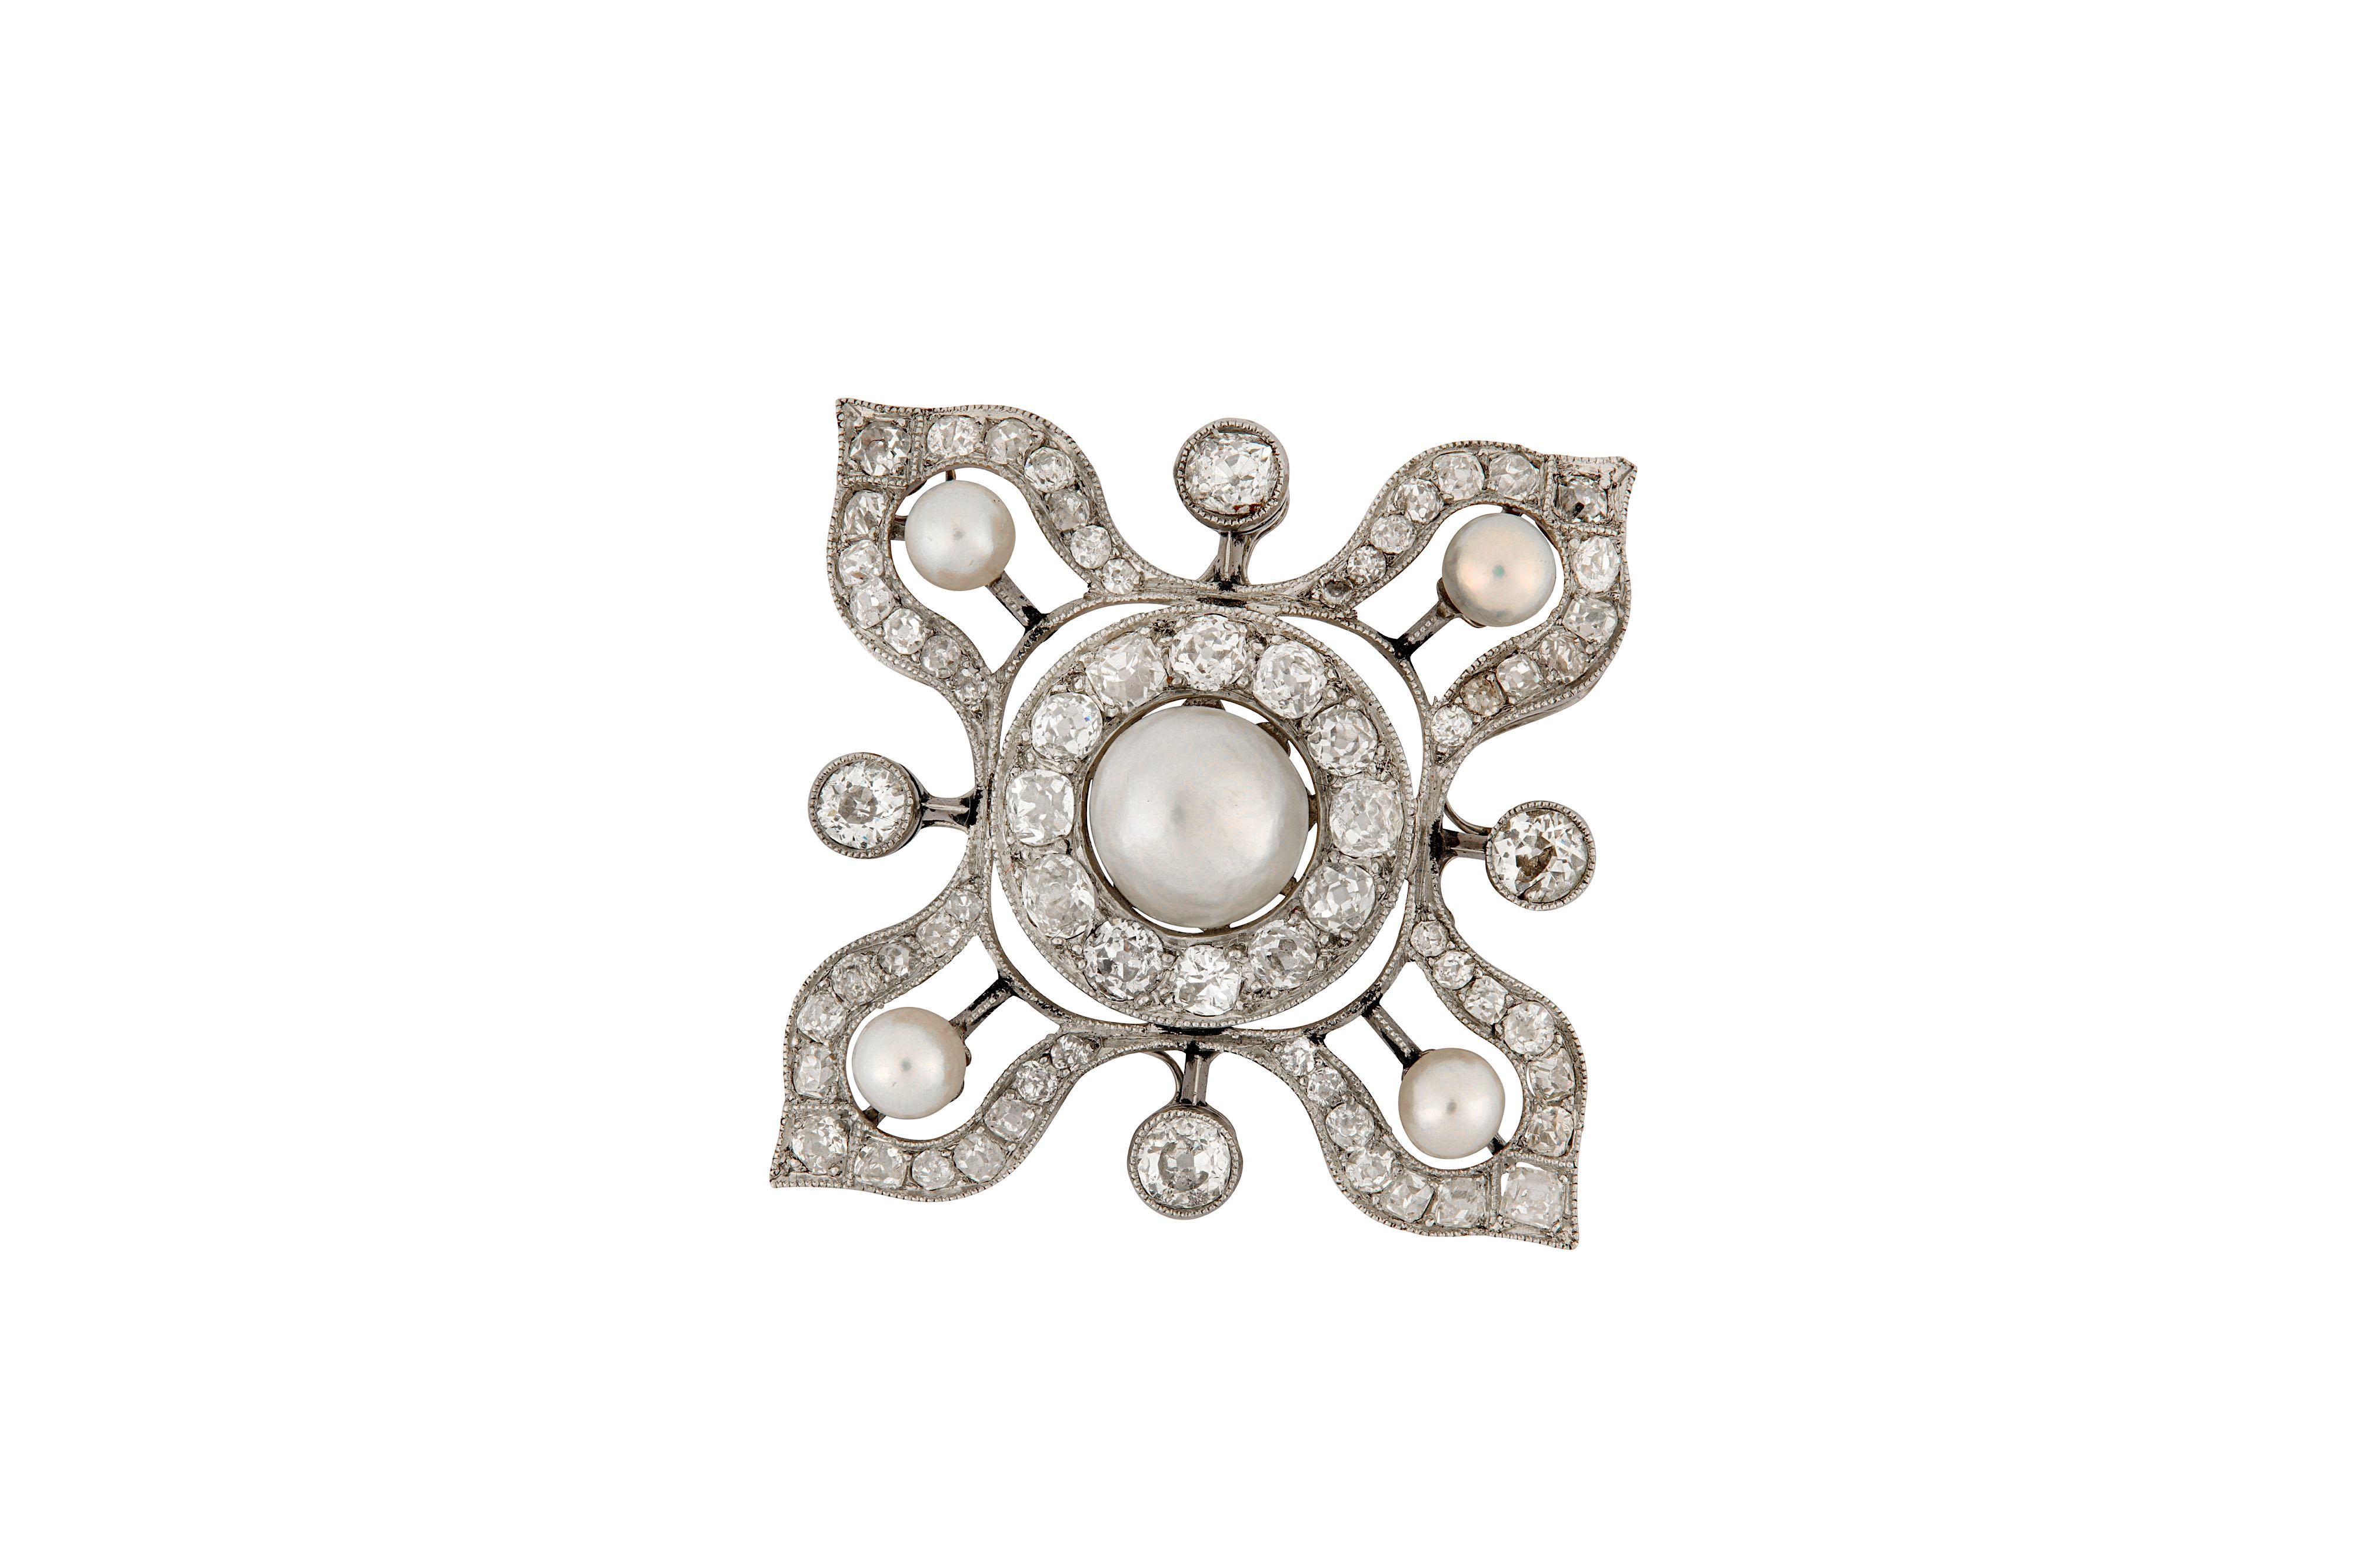 A pearl and diamond brooch - Image 2 of 2